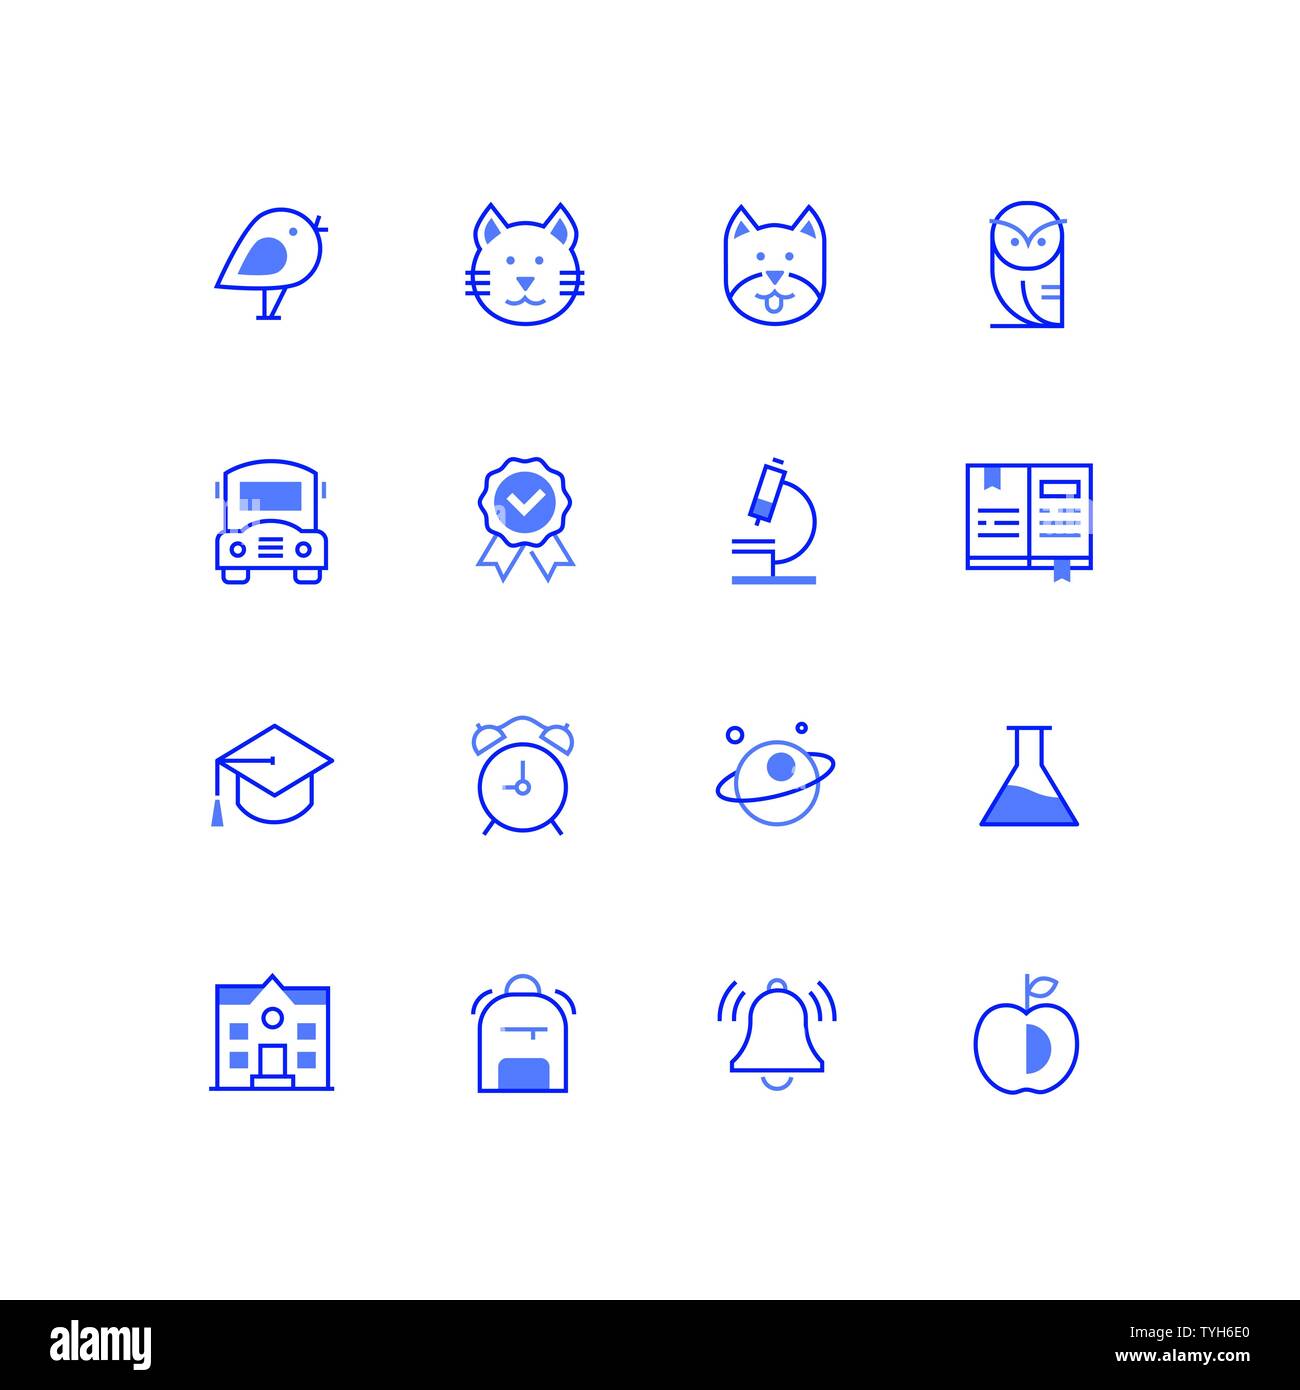 Education - modern line design style icons set Stock Vector